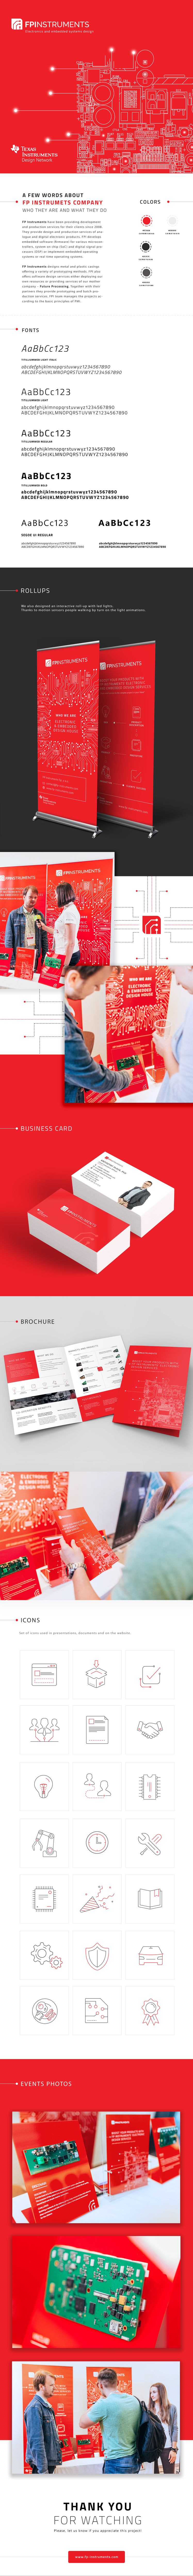 brochure icon design  Layout Design CI branding  business card stand design red